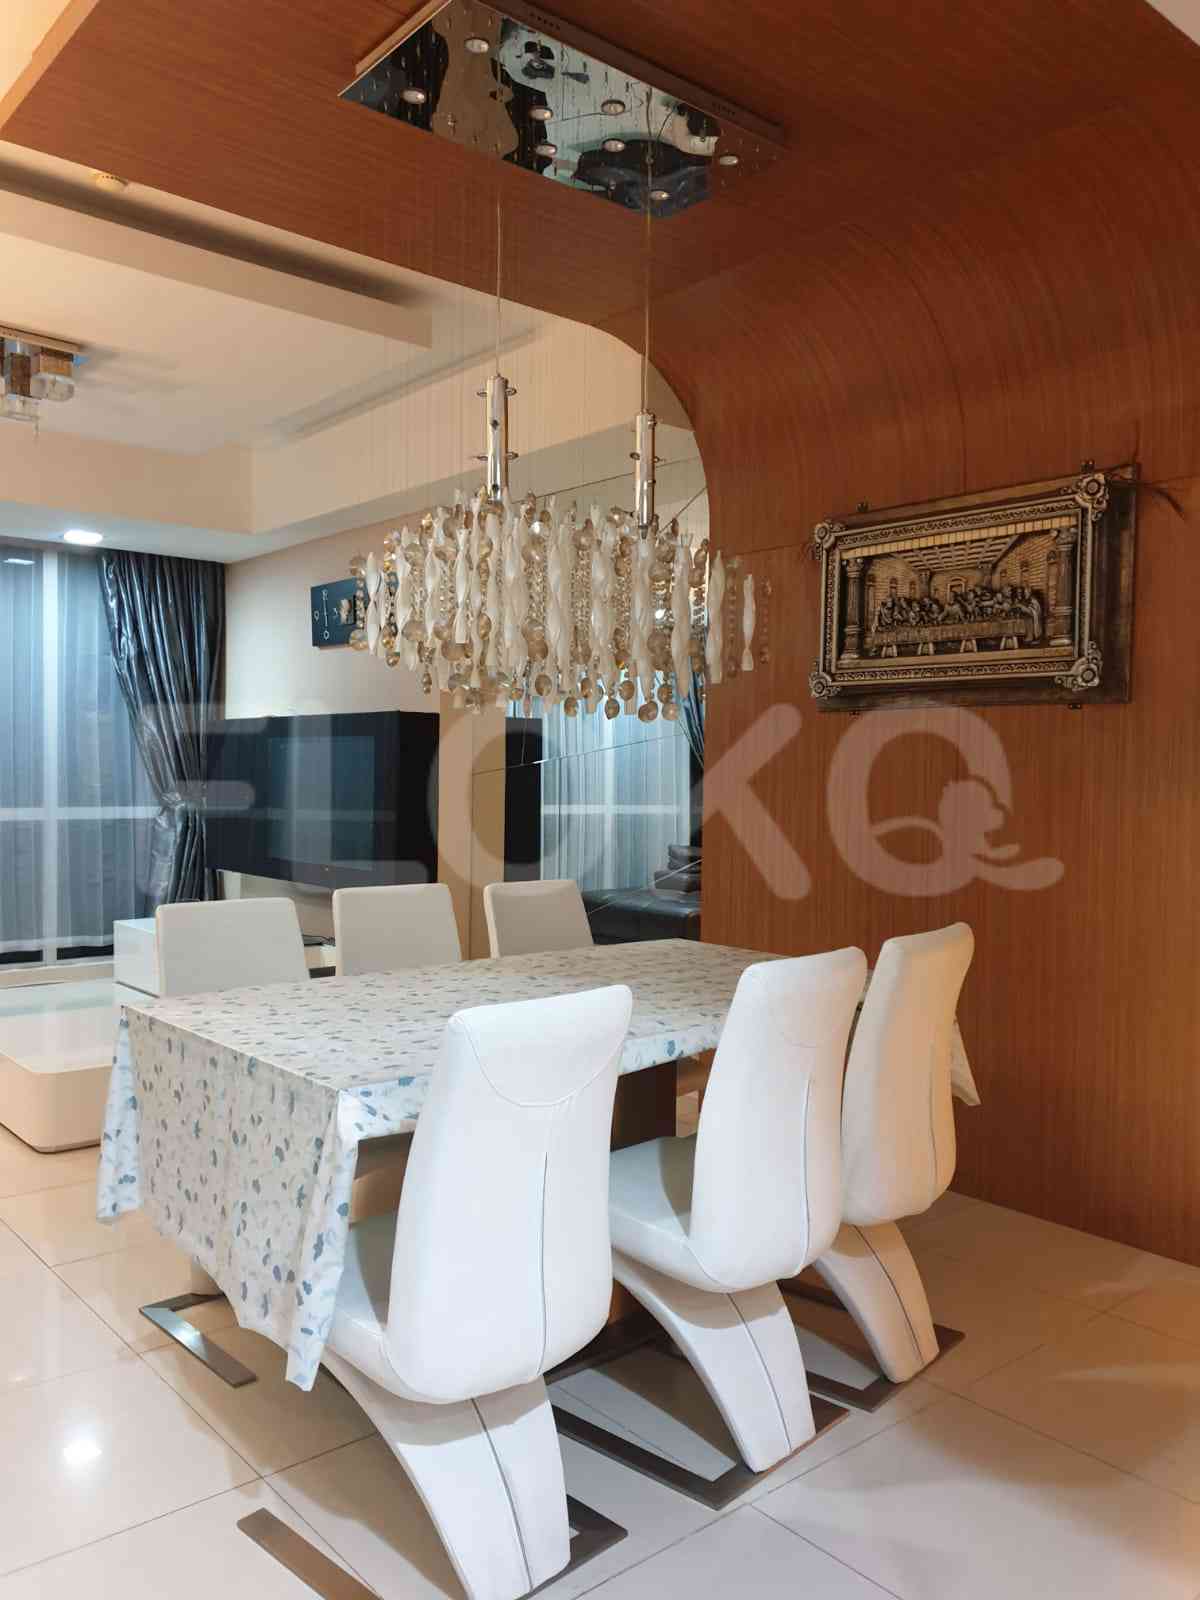 3 Bedroom on 16th Floor for Rent in Kemang Village Residence - fked77 5